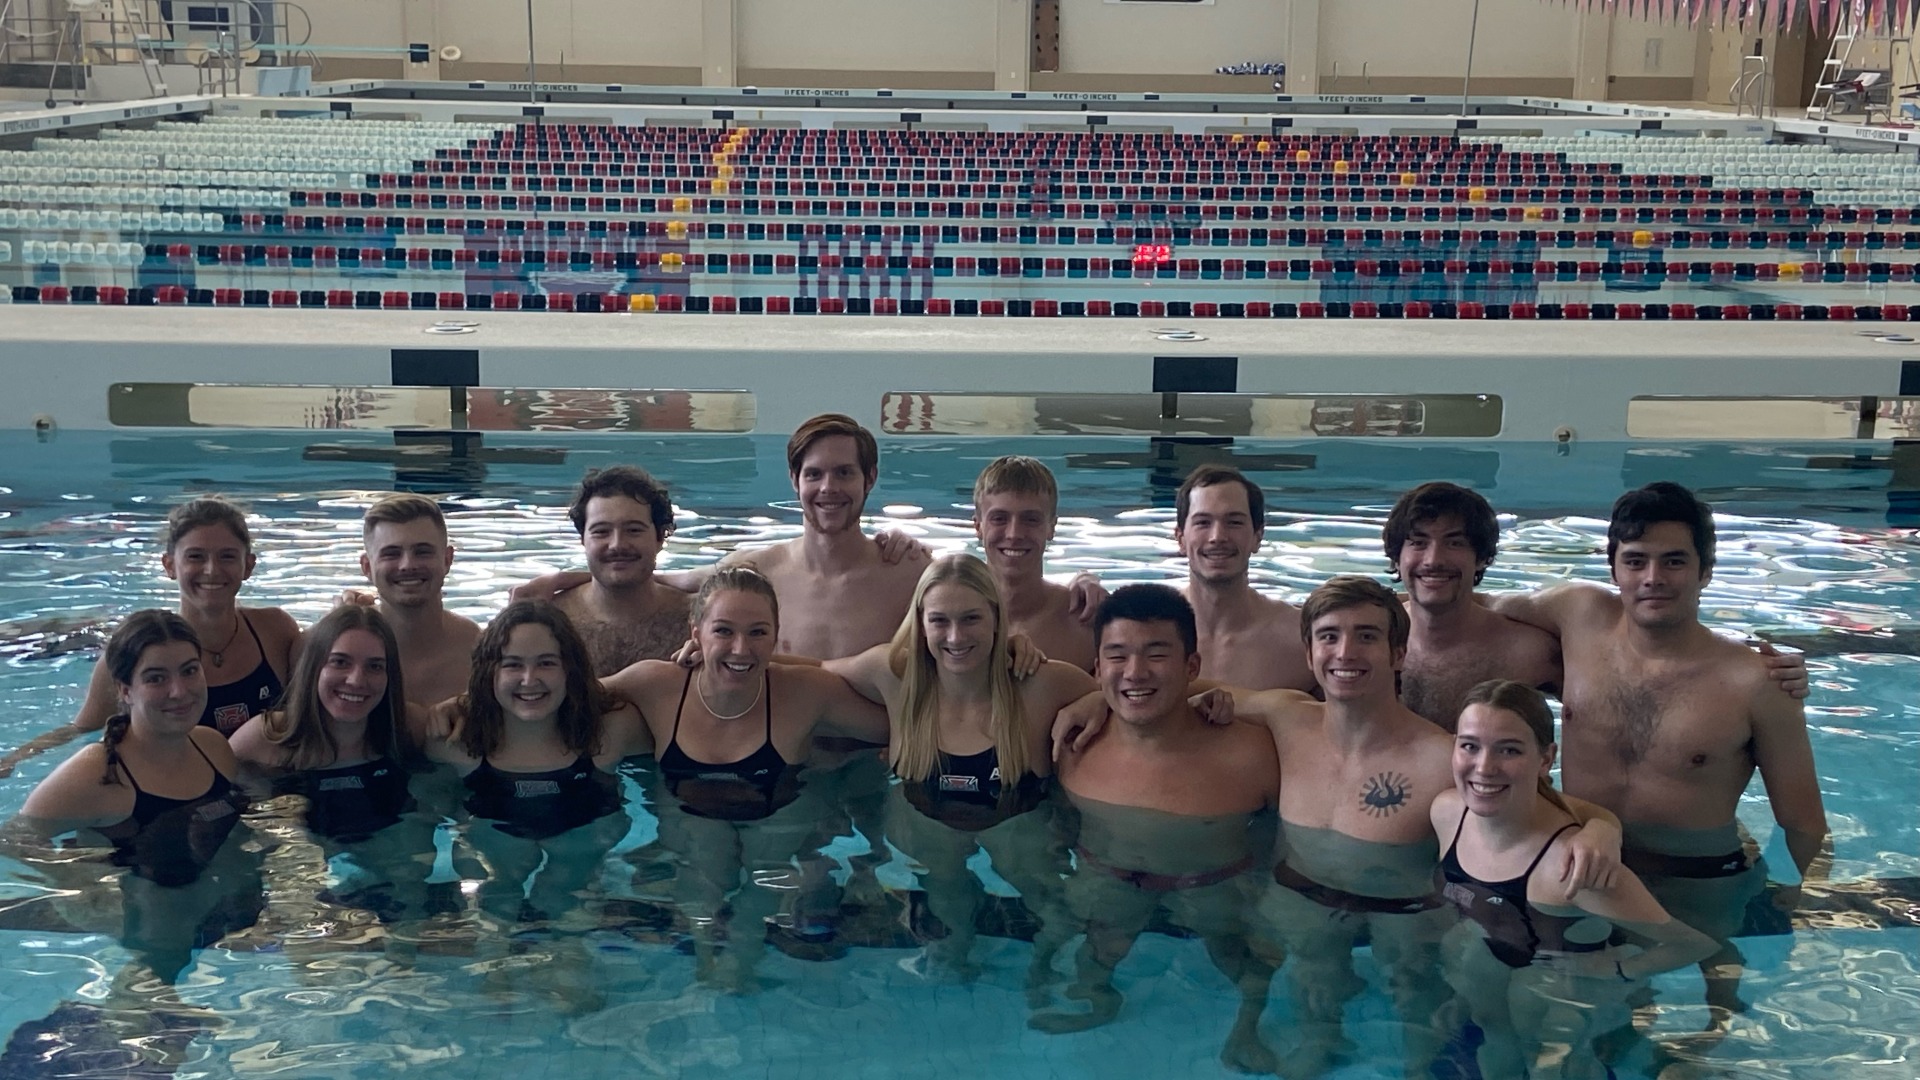 Swim team smiling at the camera inside the pool